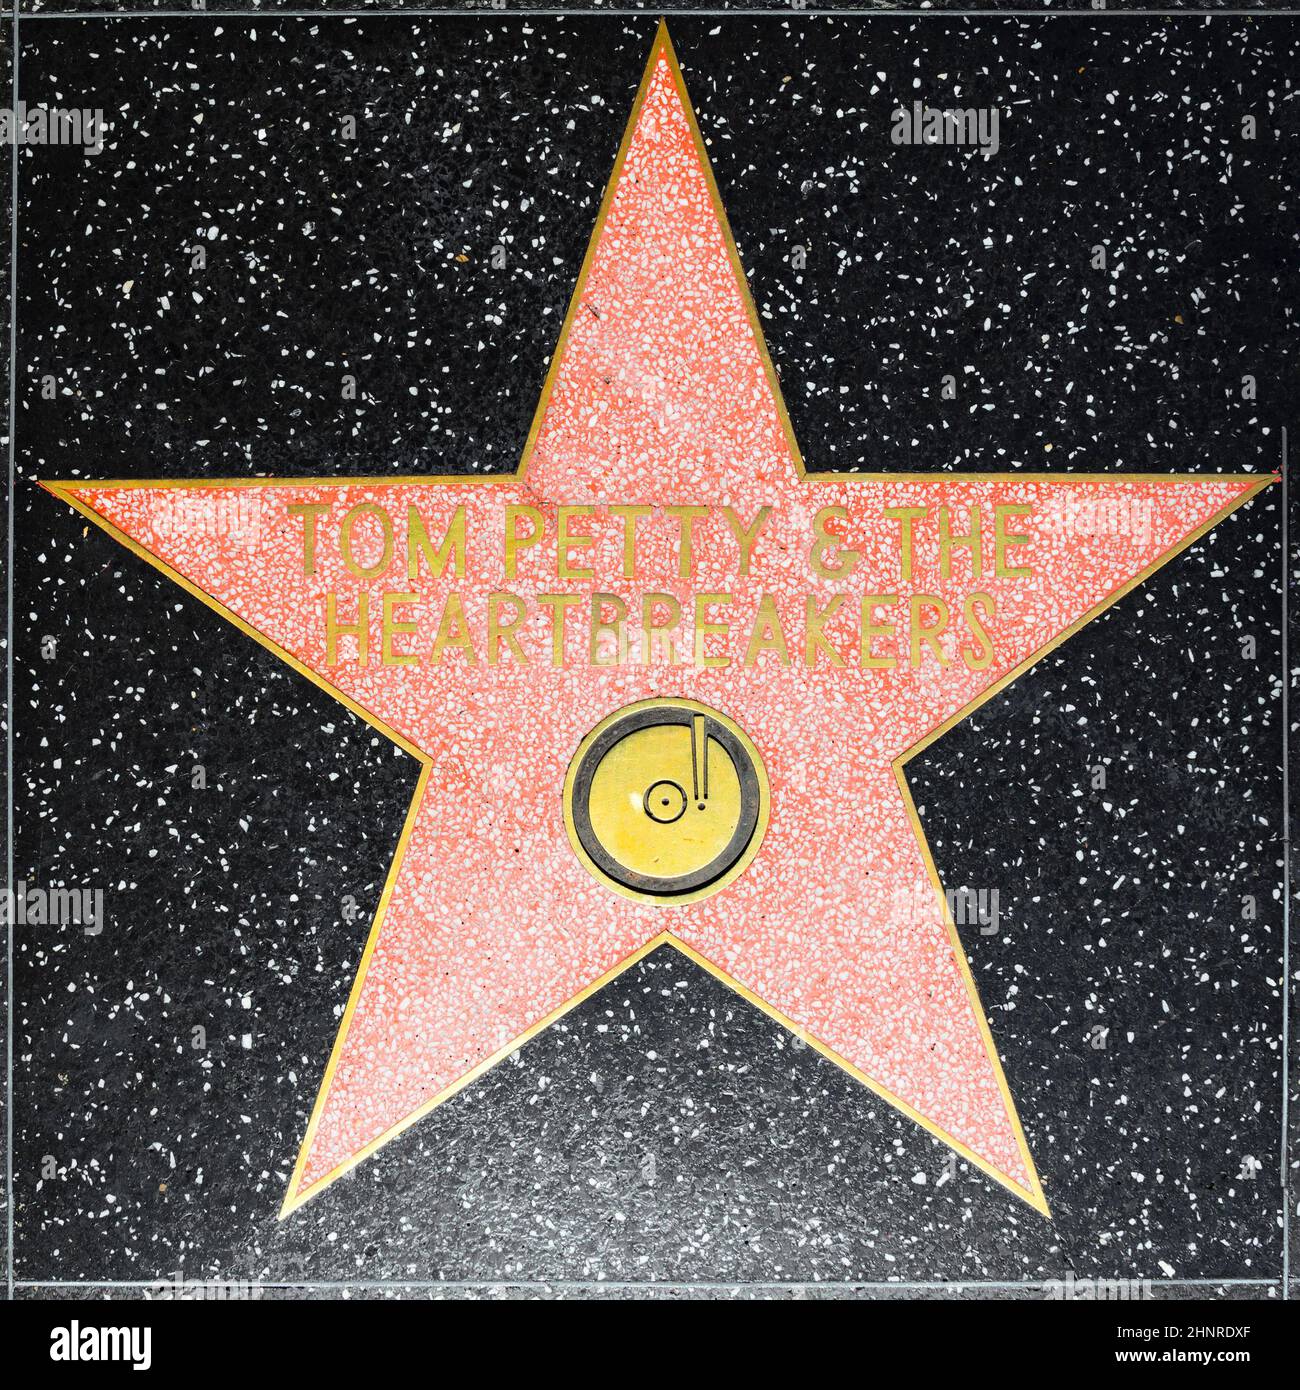 Tom Petty & the Heartbreakers star on Hollywood Walk of Fame Stock Photo